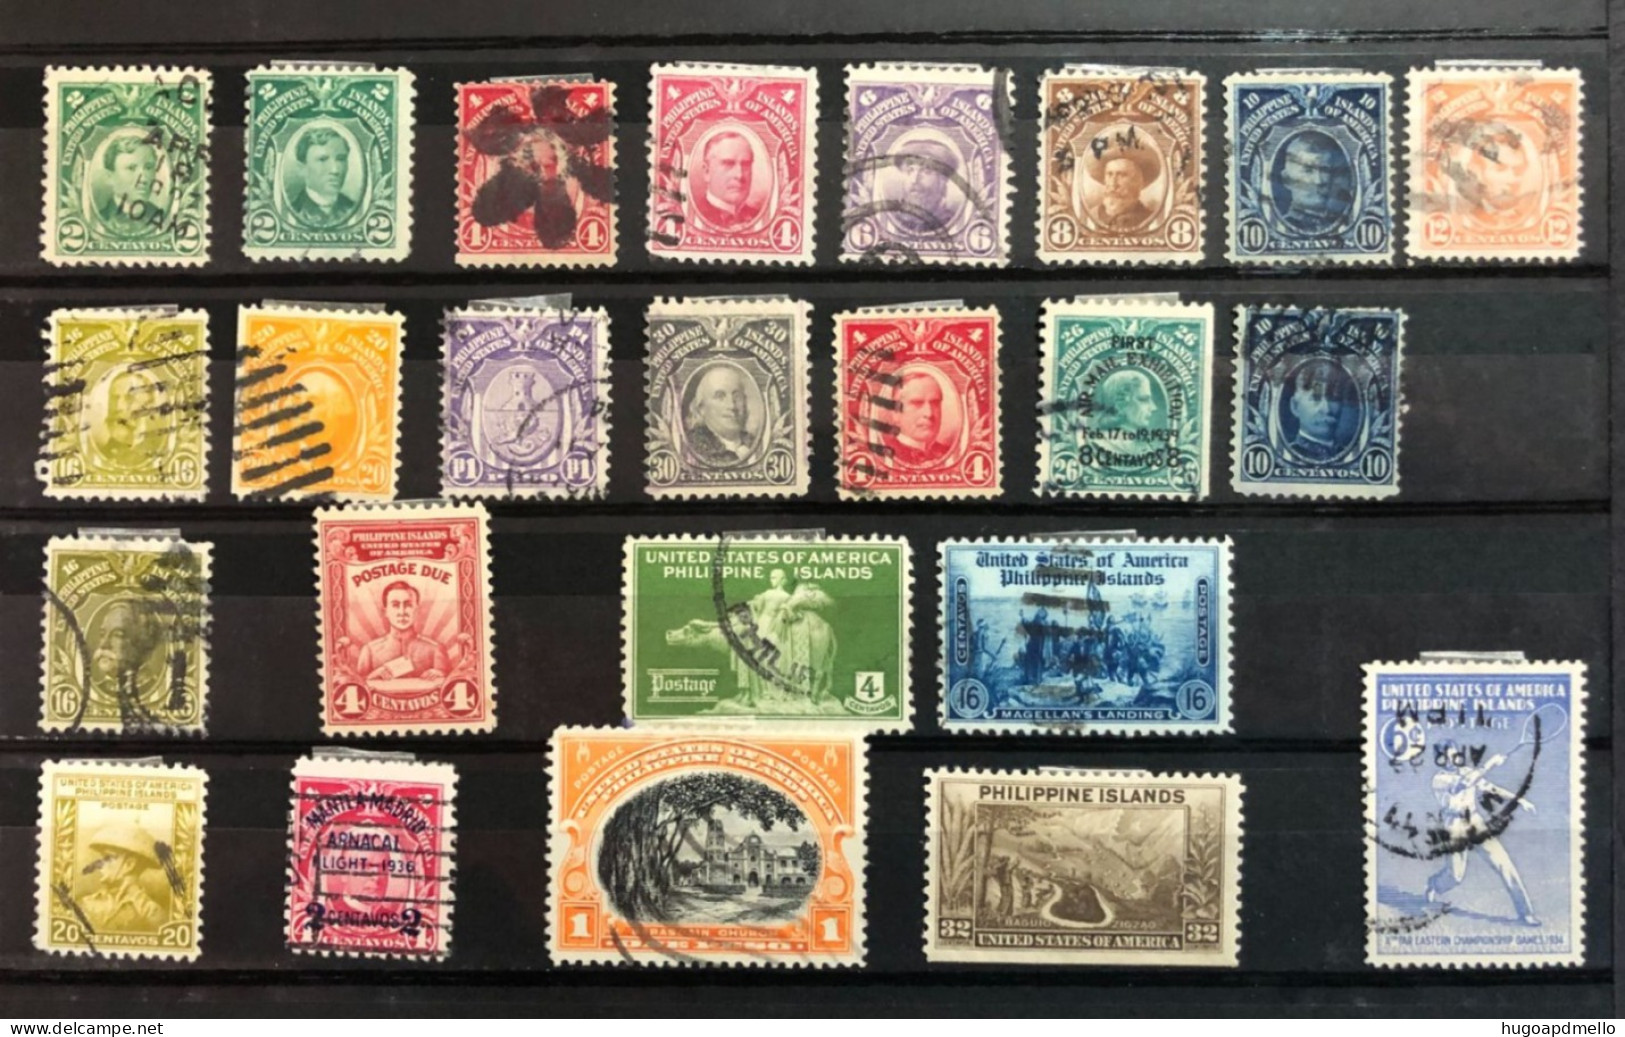 PHILIPPINES Islands (United States Possession), Lot Composed Of 24 Old Stamps. *MH And USED - Philippines